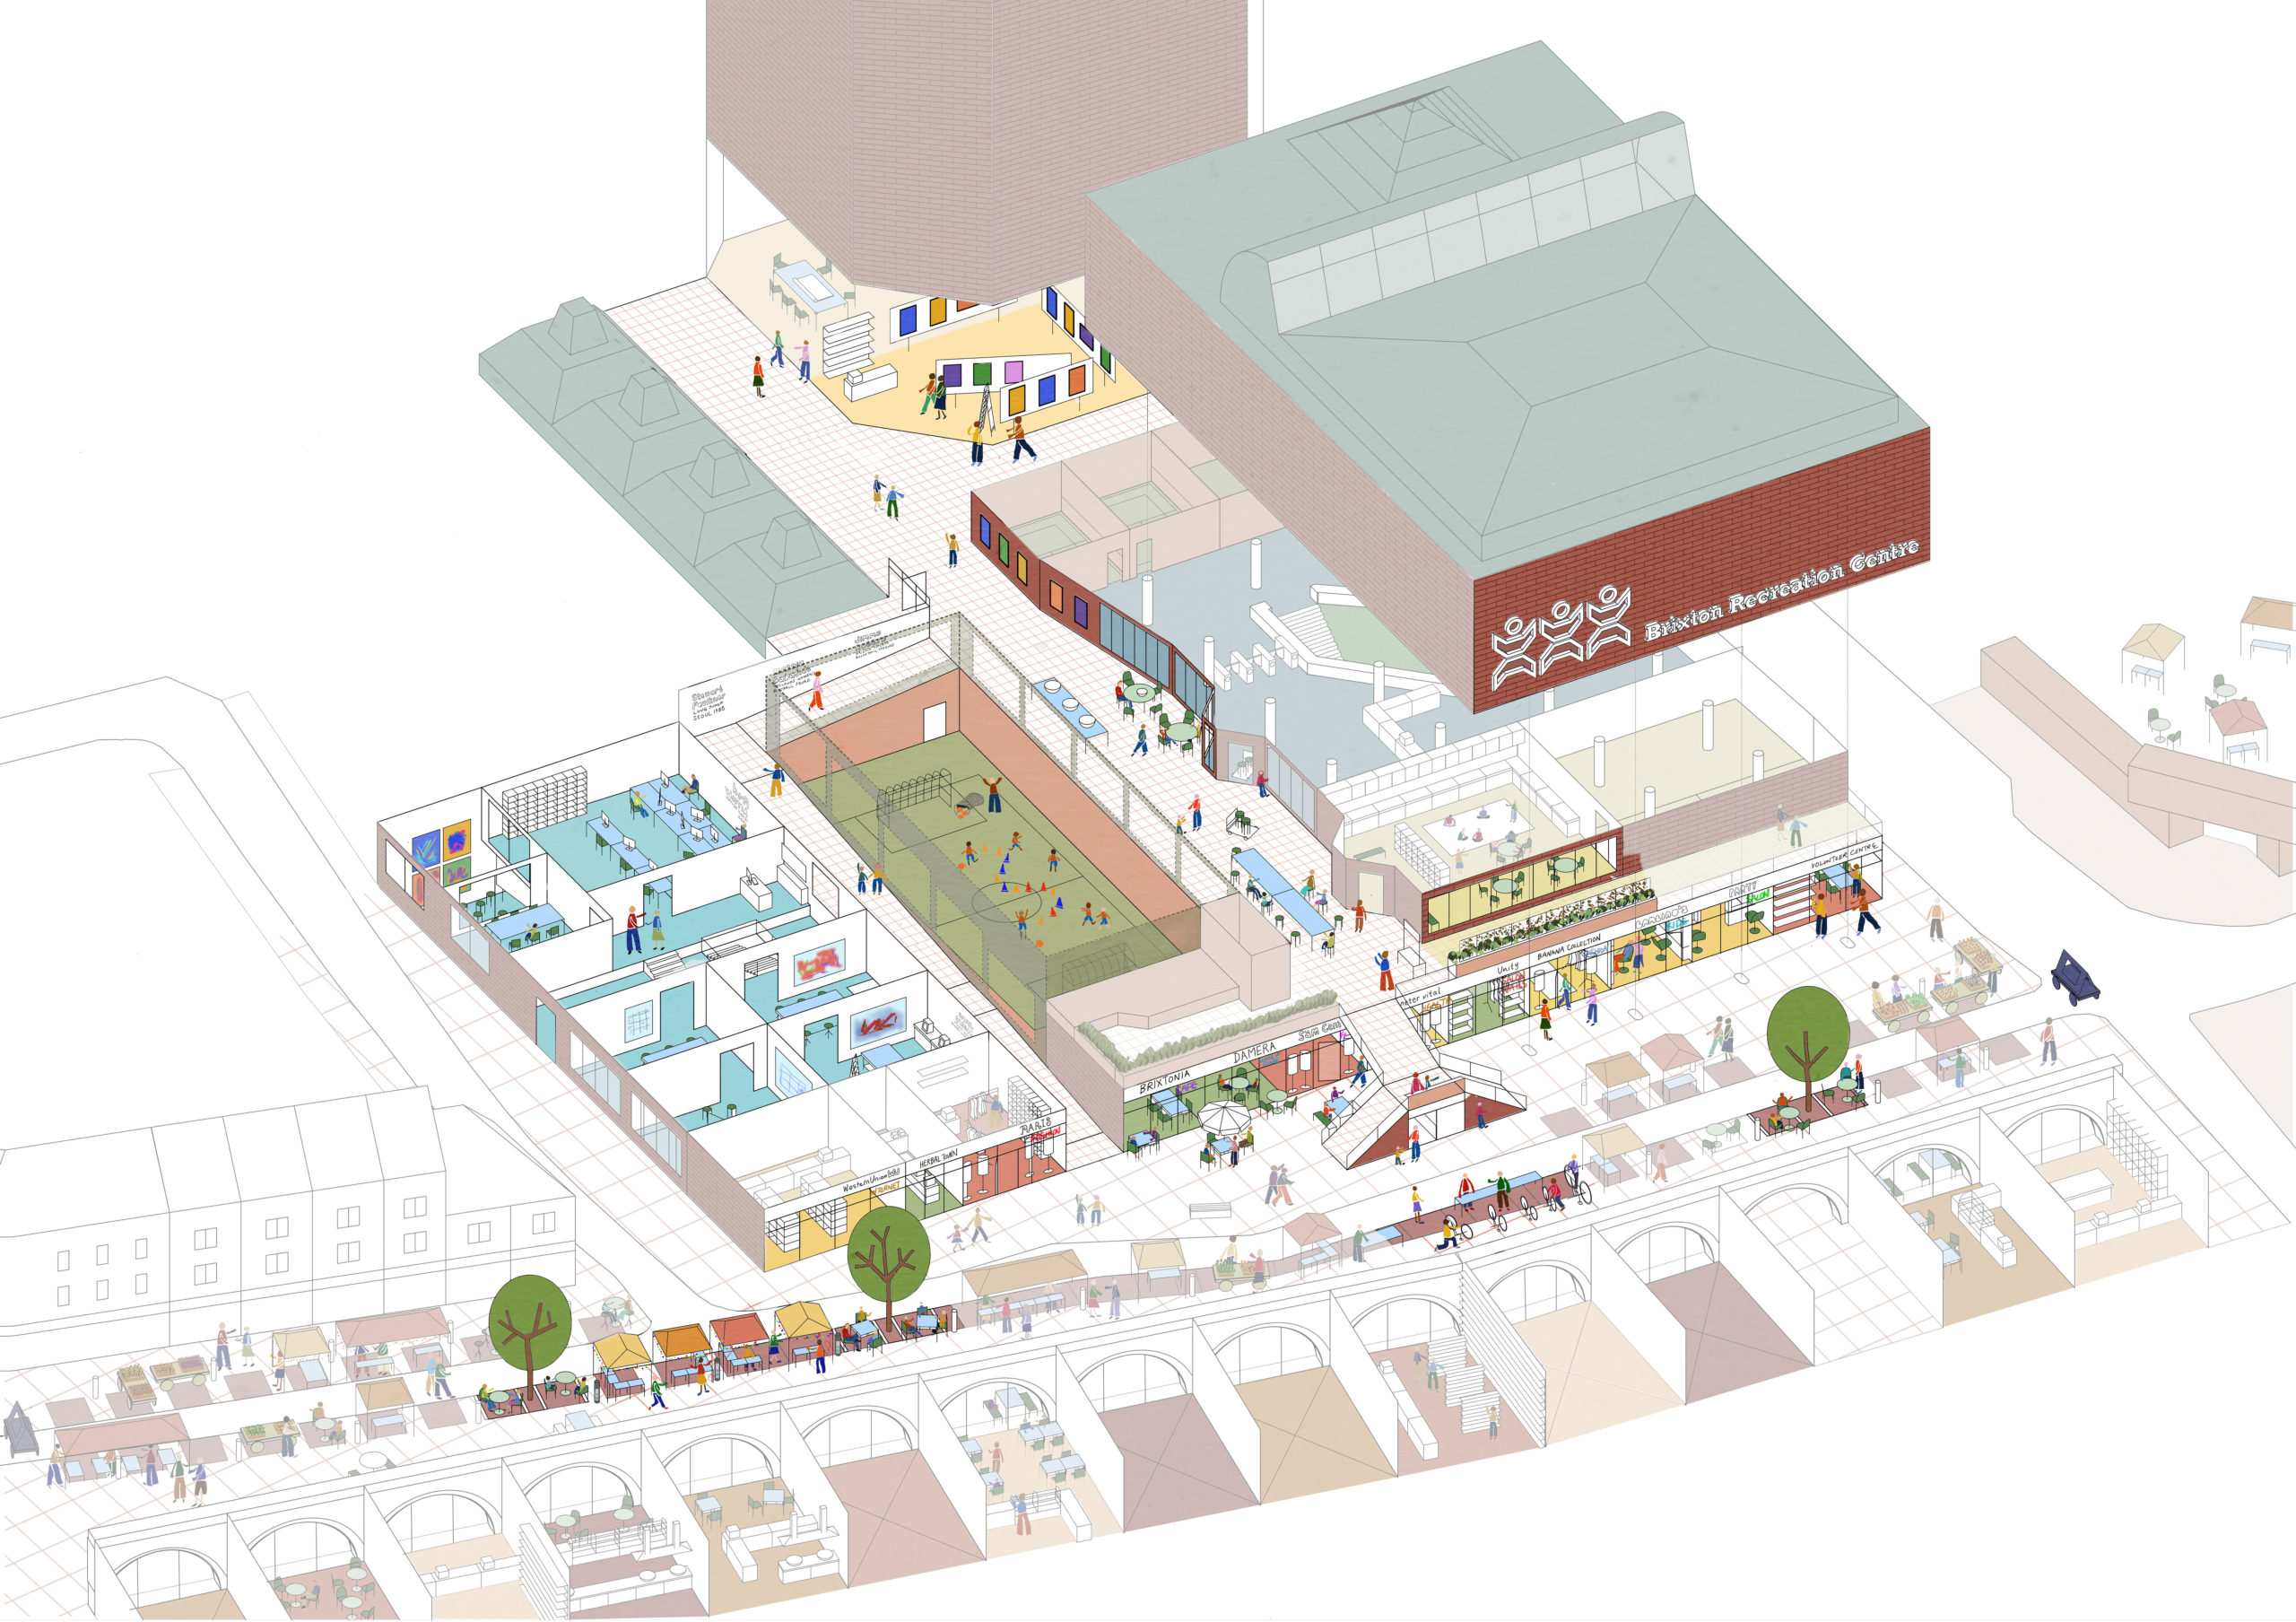 Brixton: Town centre investment for local communities